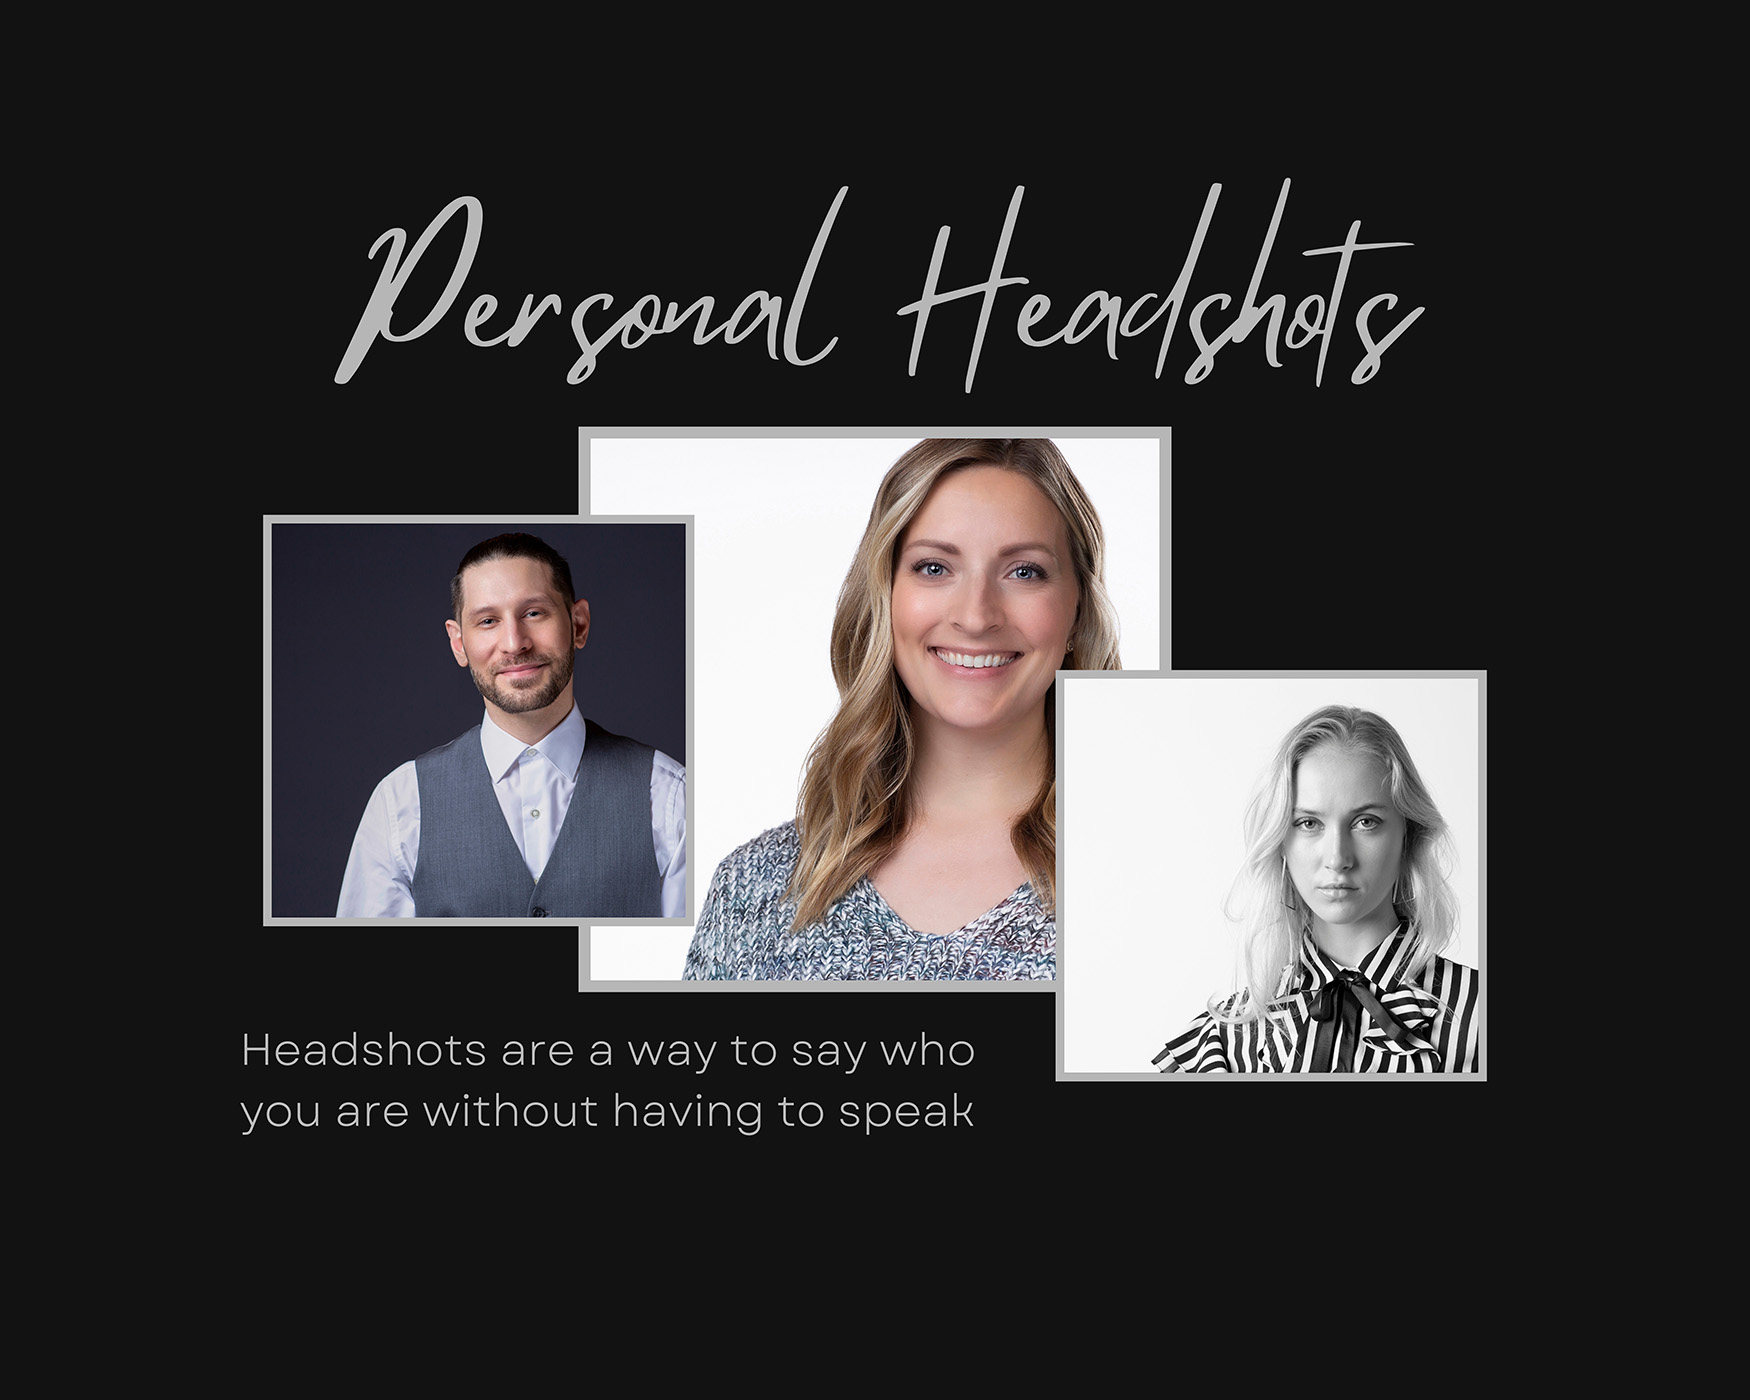 PREPARATION TIPS FOR YOUR HEADSHOT OR PROFESSIONAL PORTRAIT SESSION